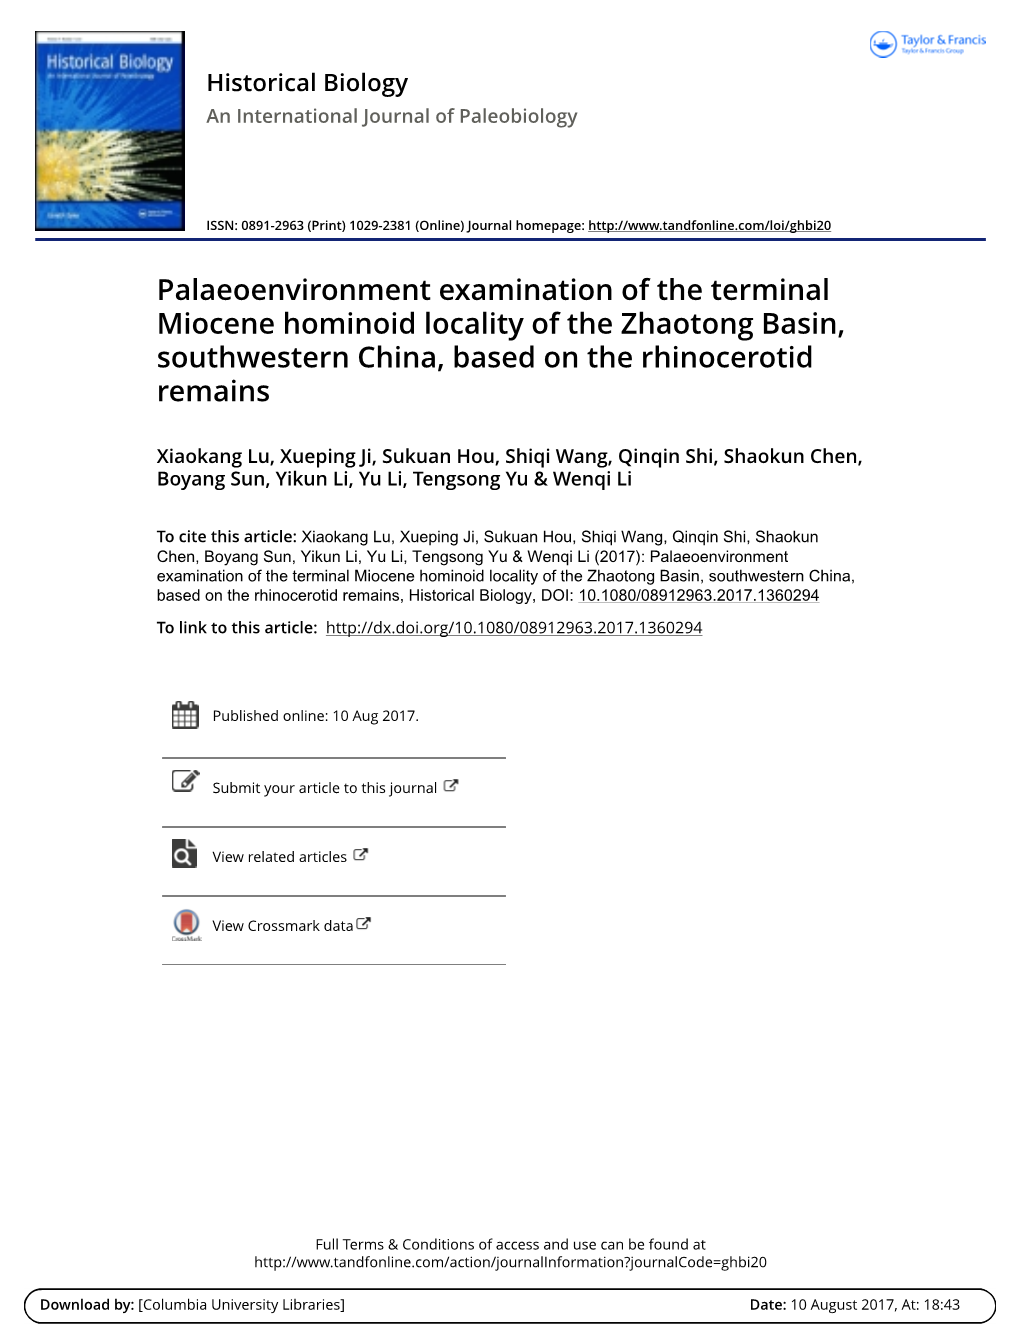 Palaeoenvironment Examination of the Terminal Miocene Hominoid Locality of the Zhaotong Basin, Southwestern China, Based on the Rhinocerotid Remains